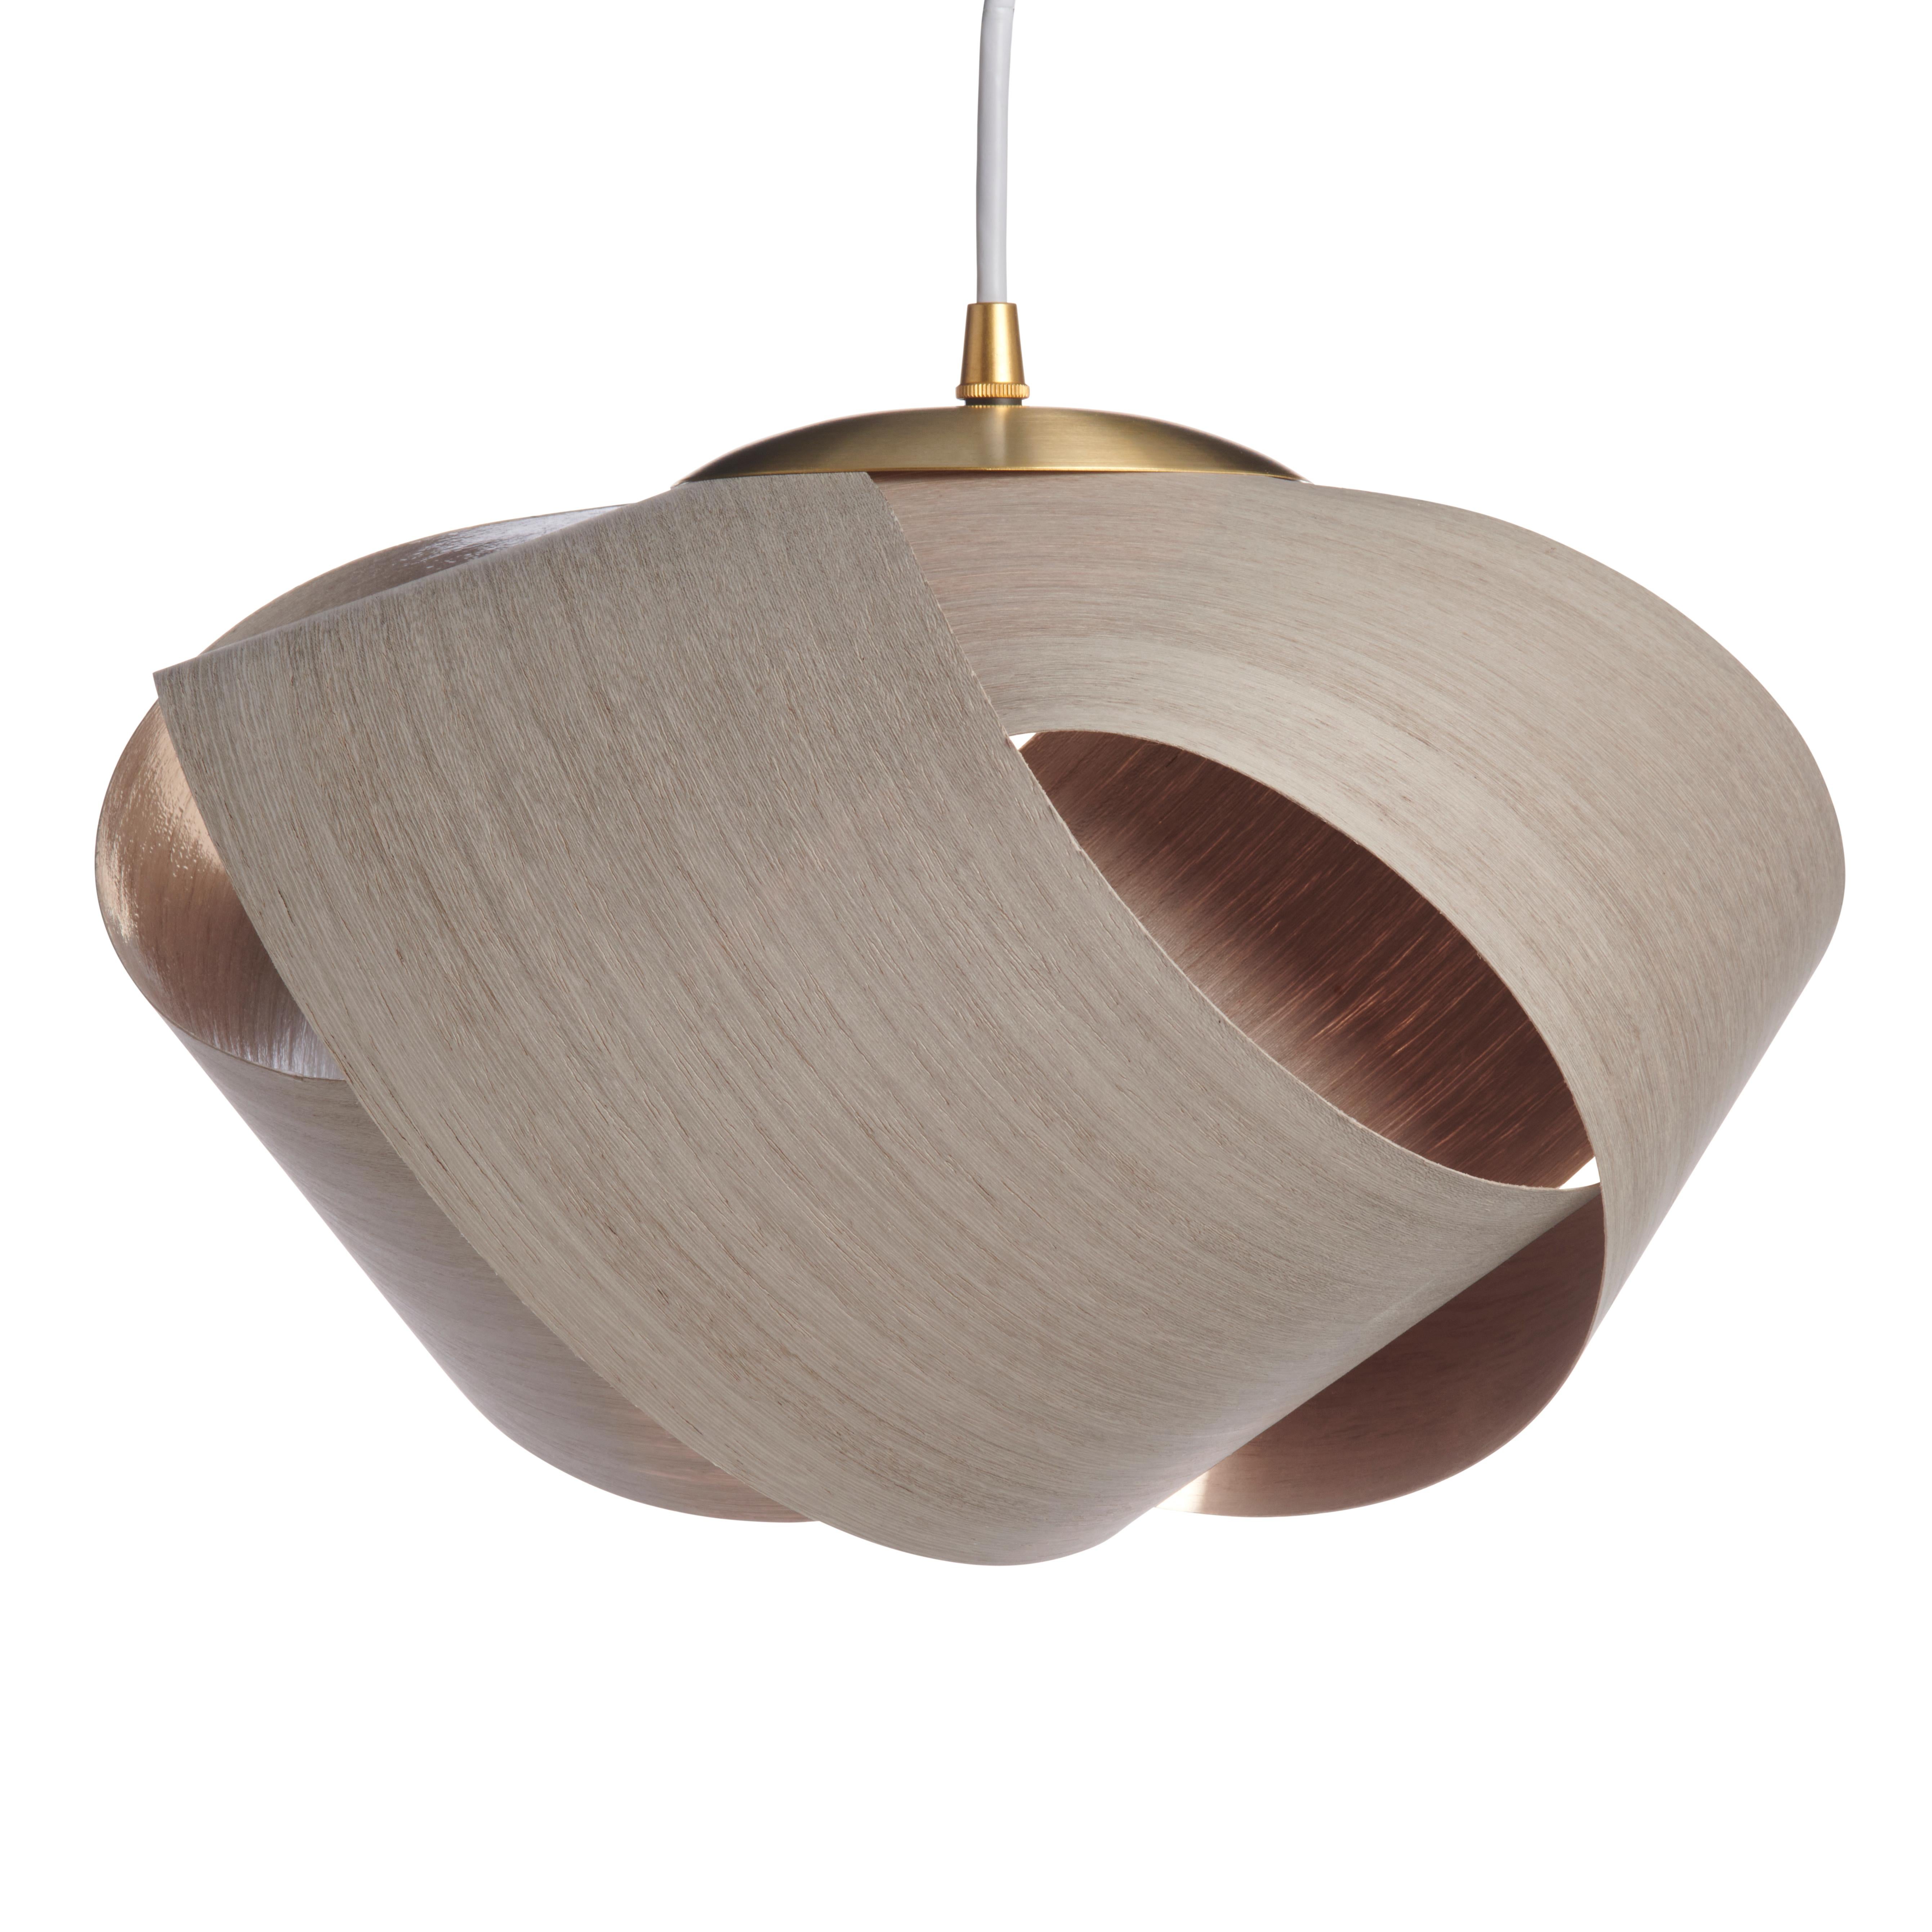 PETAL, featuring brushed brass hardware, is a contemporary Mid-Century Modern light fixture. An Organic-Modern piece with wood veneer and a brushed brass accent. This is a minimalist luxury pendant design which can be exhibited in dining rooms,